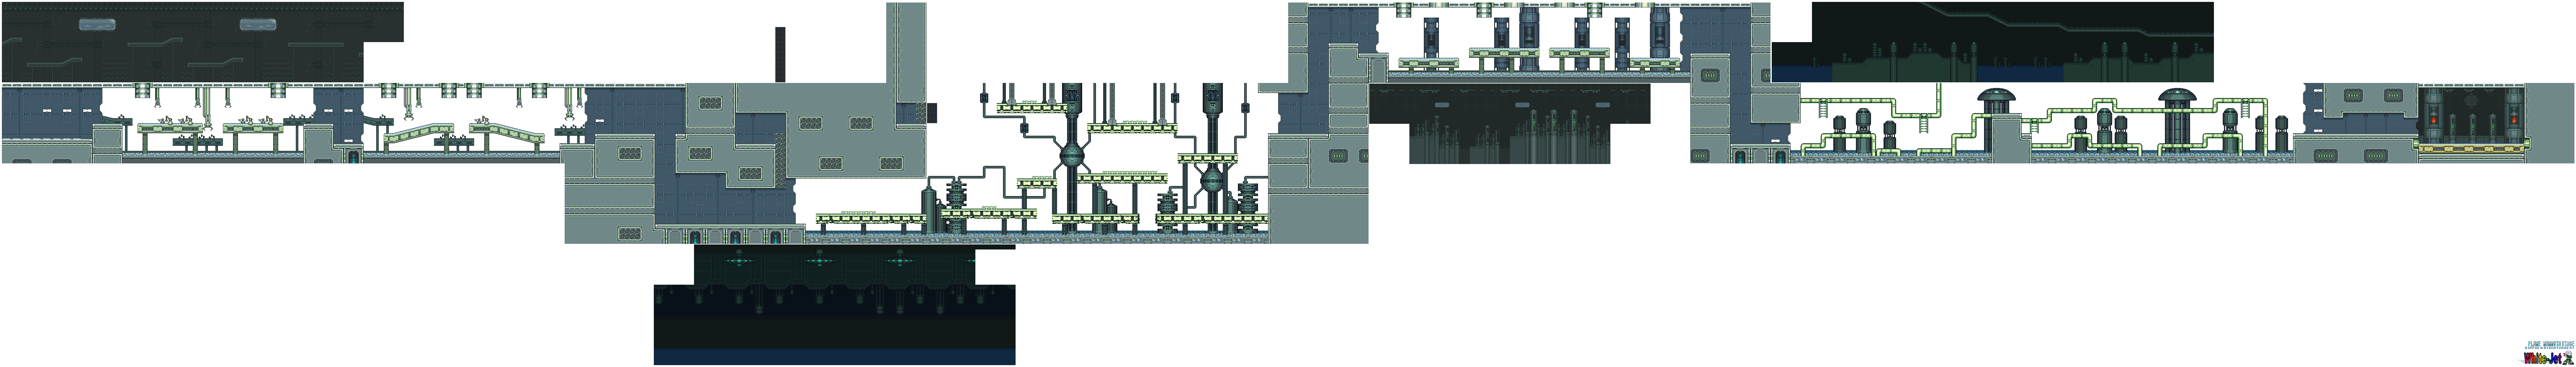 Mega Man X - Flame Mammoth Stage (Altered)